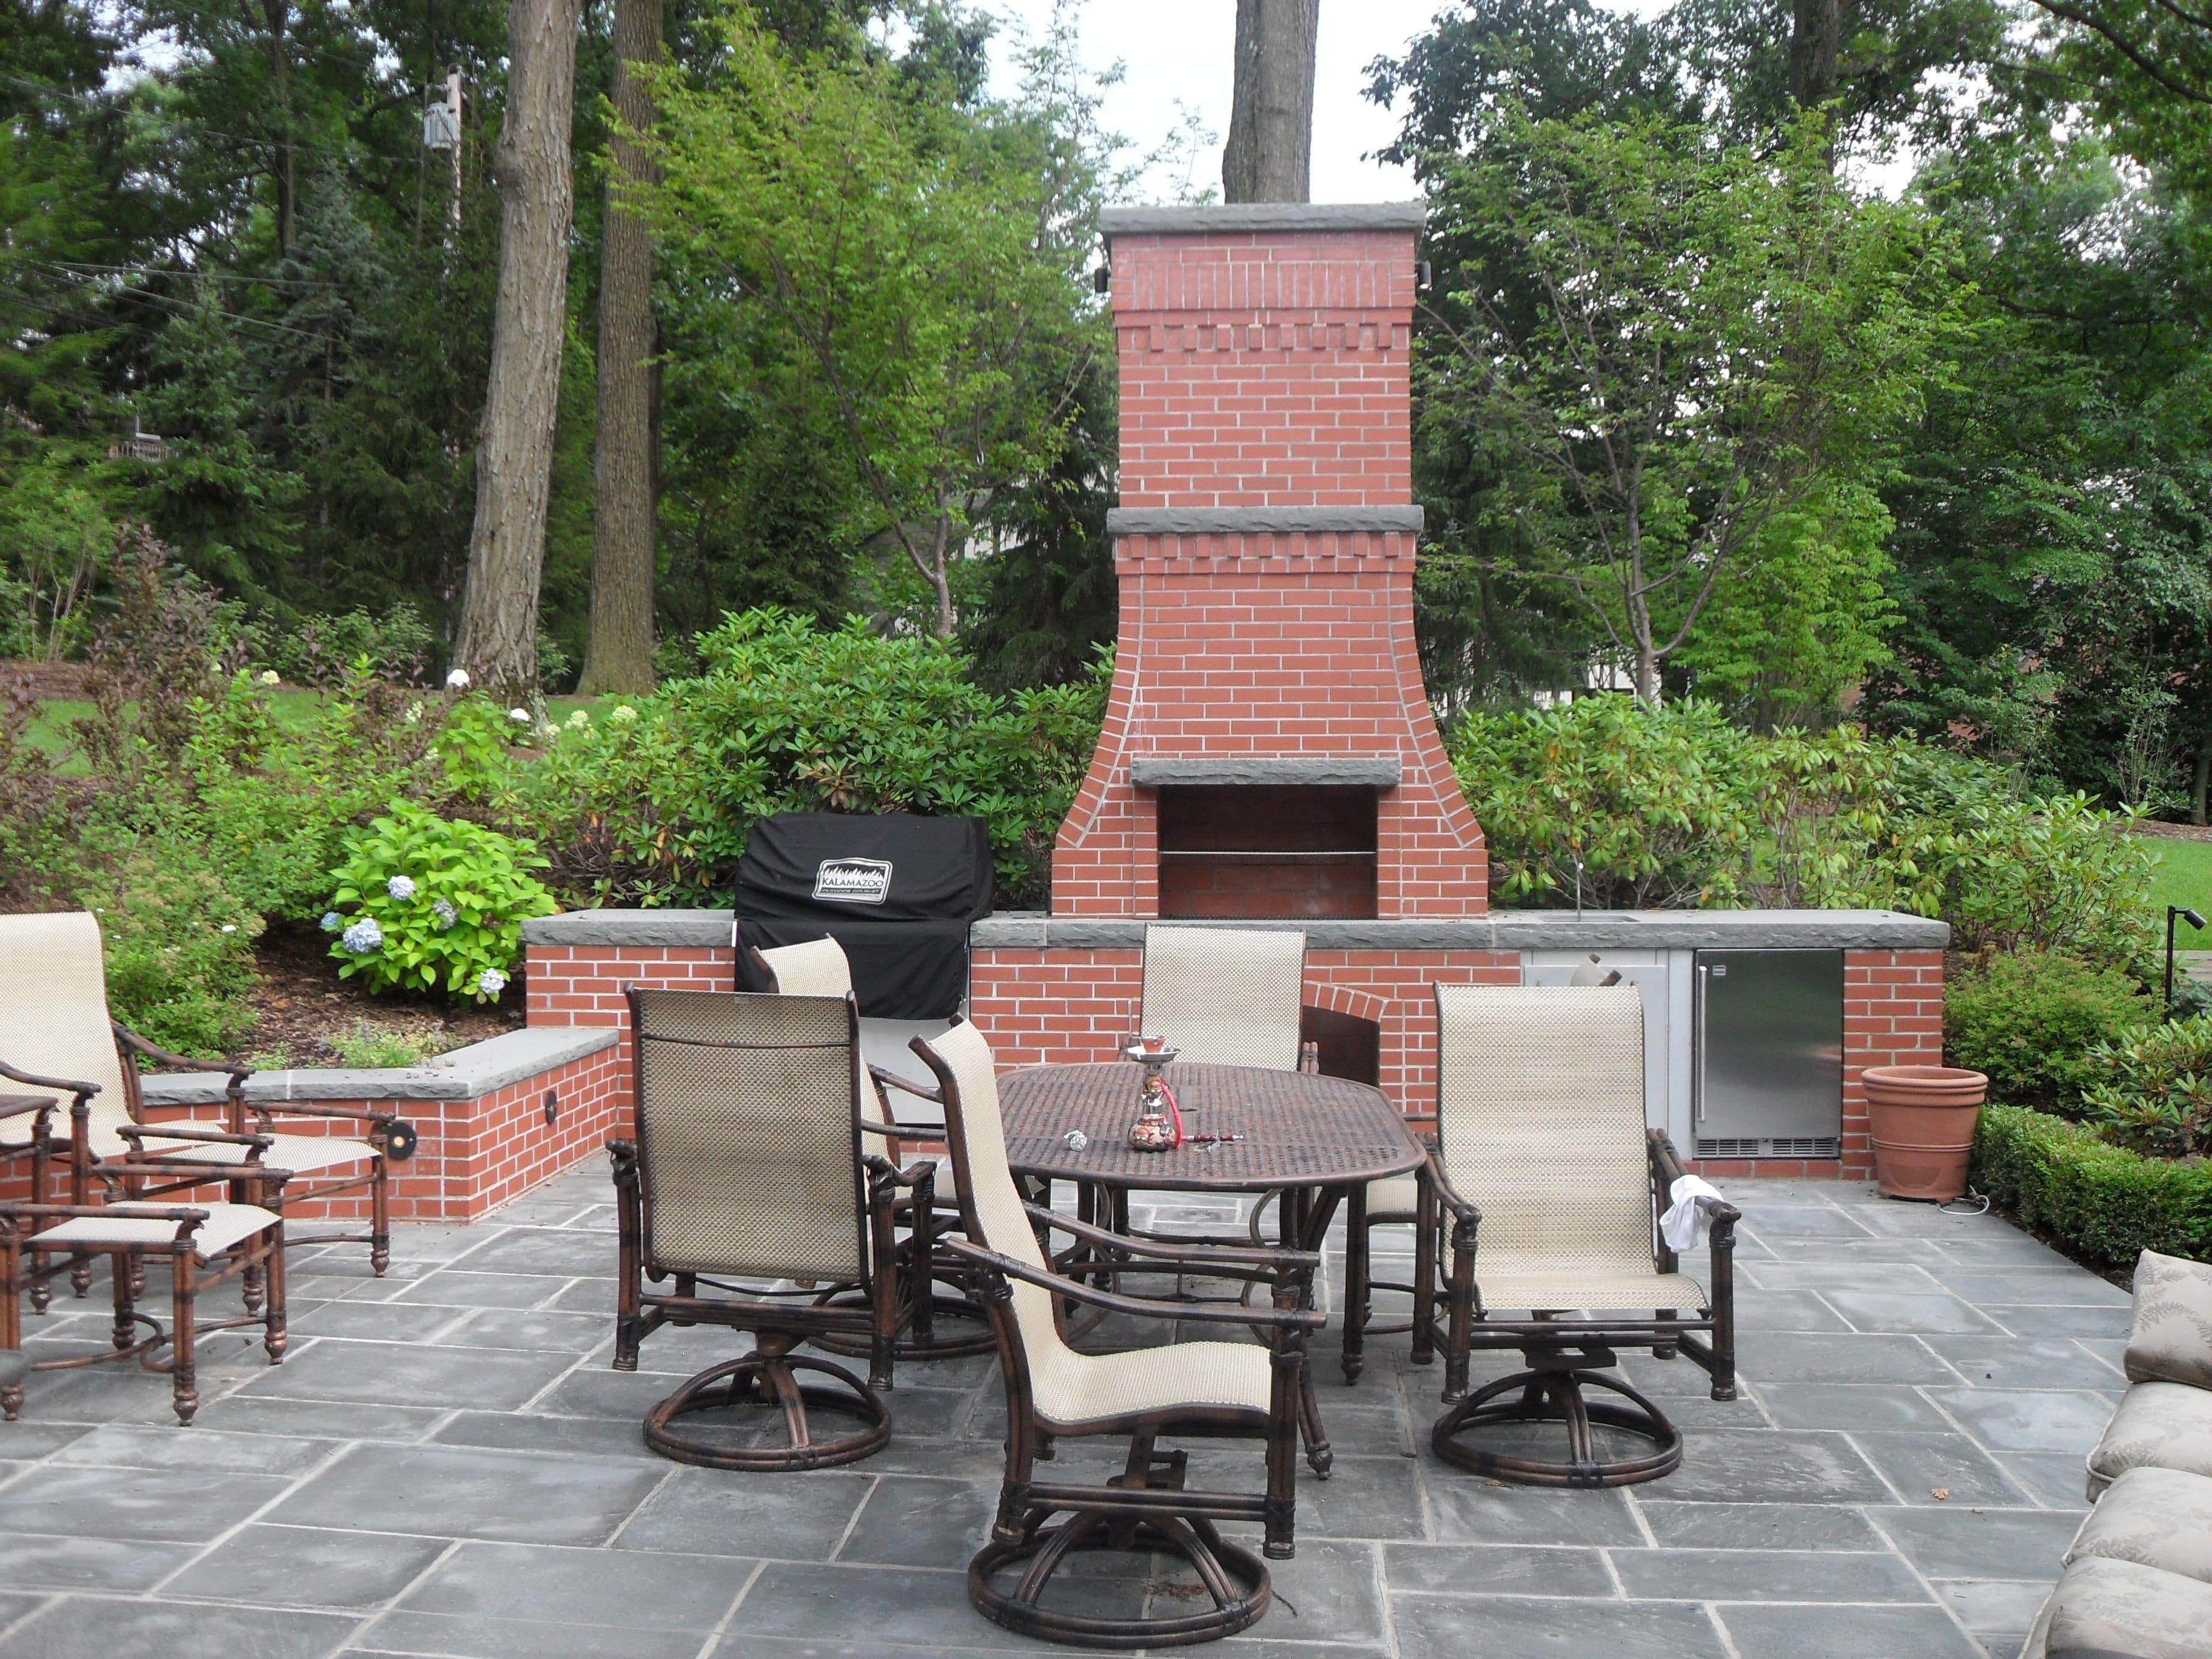 Contact us for your outdoor oasis!!!